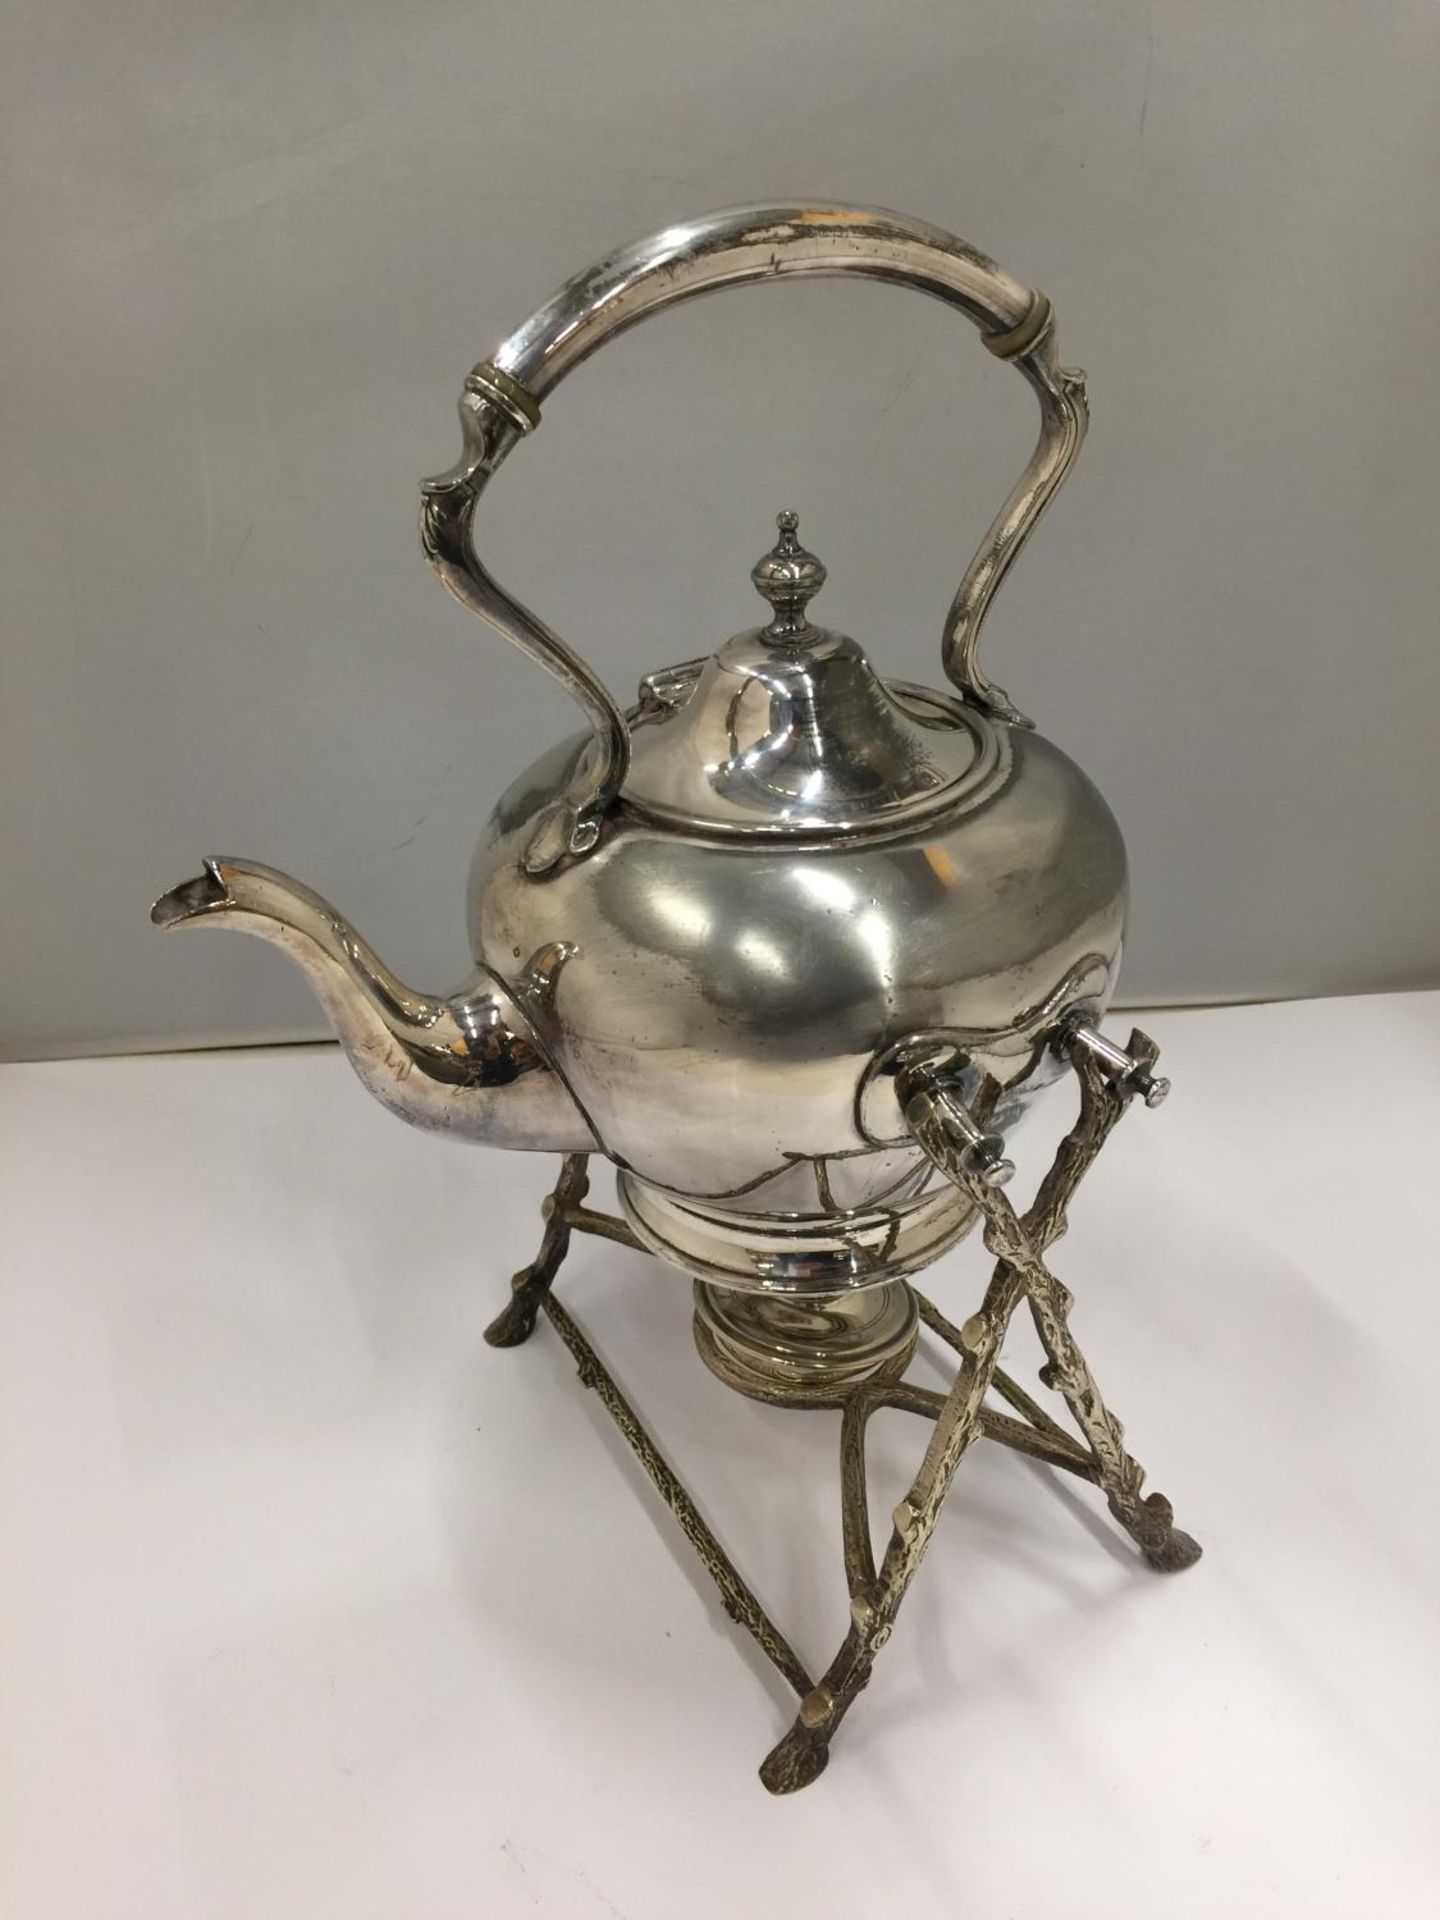 A SILVER PLATED KETTLE ON A STAND WITH SPIRIT BURNER - Image 2 of 5